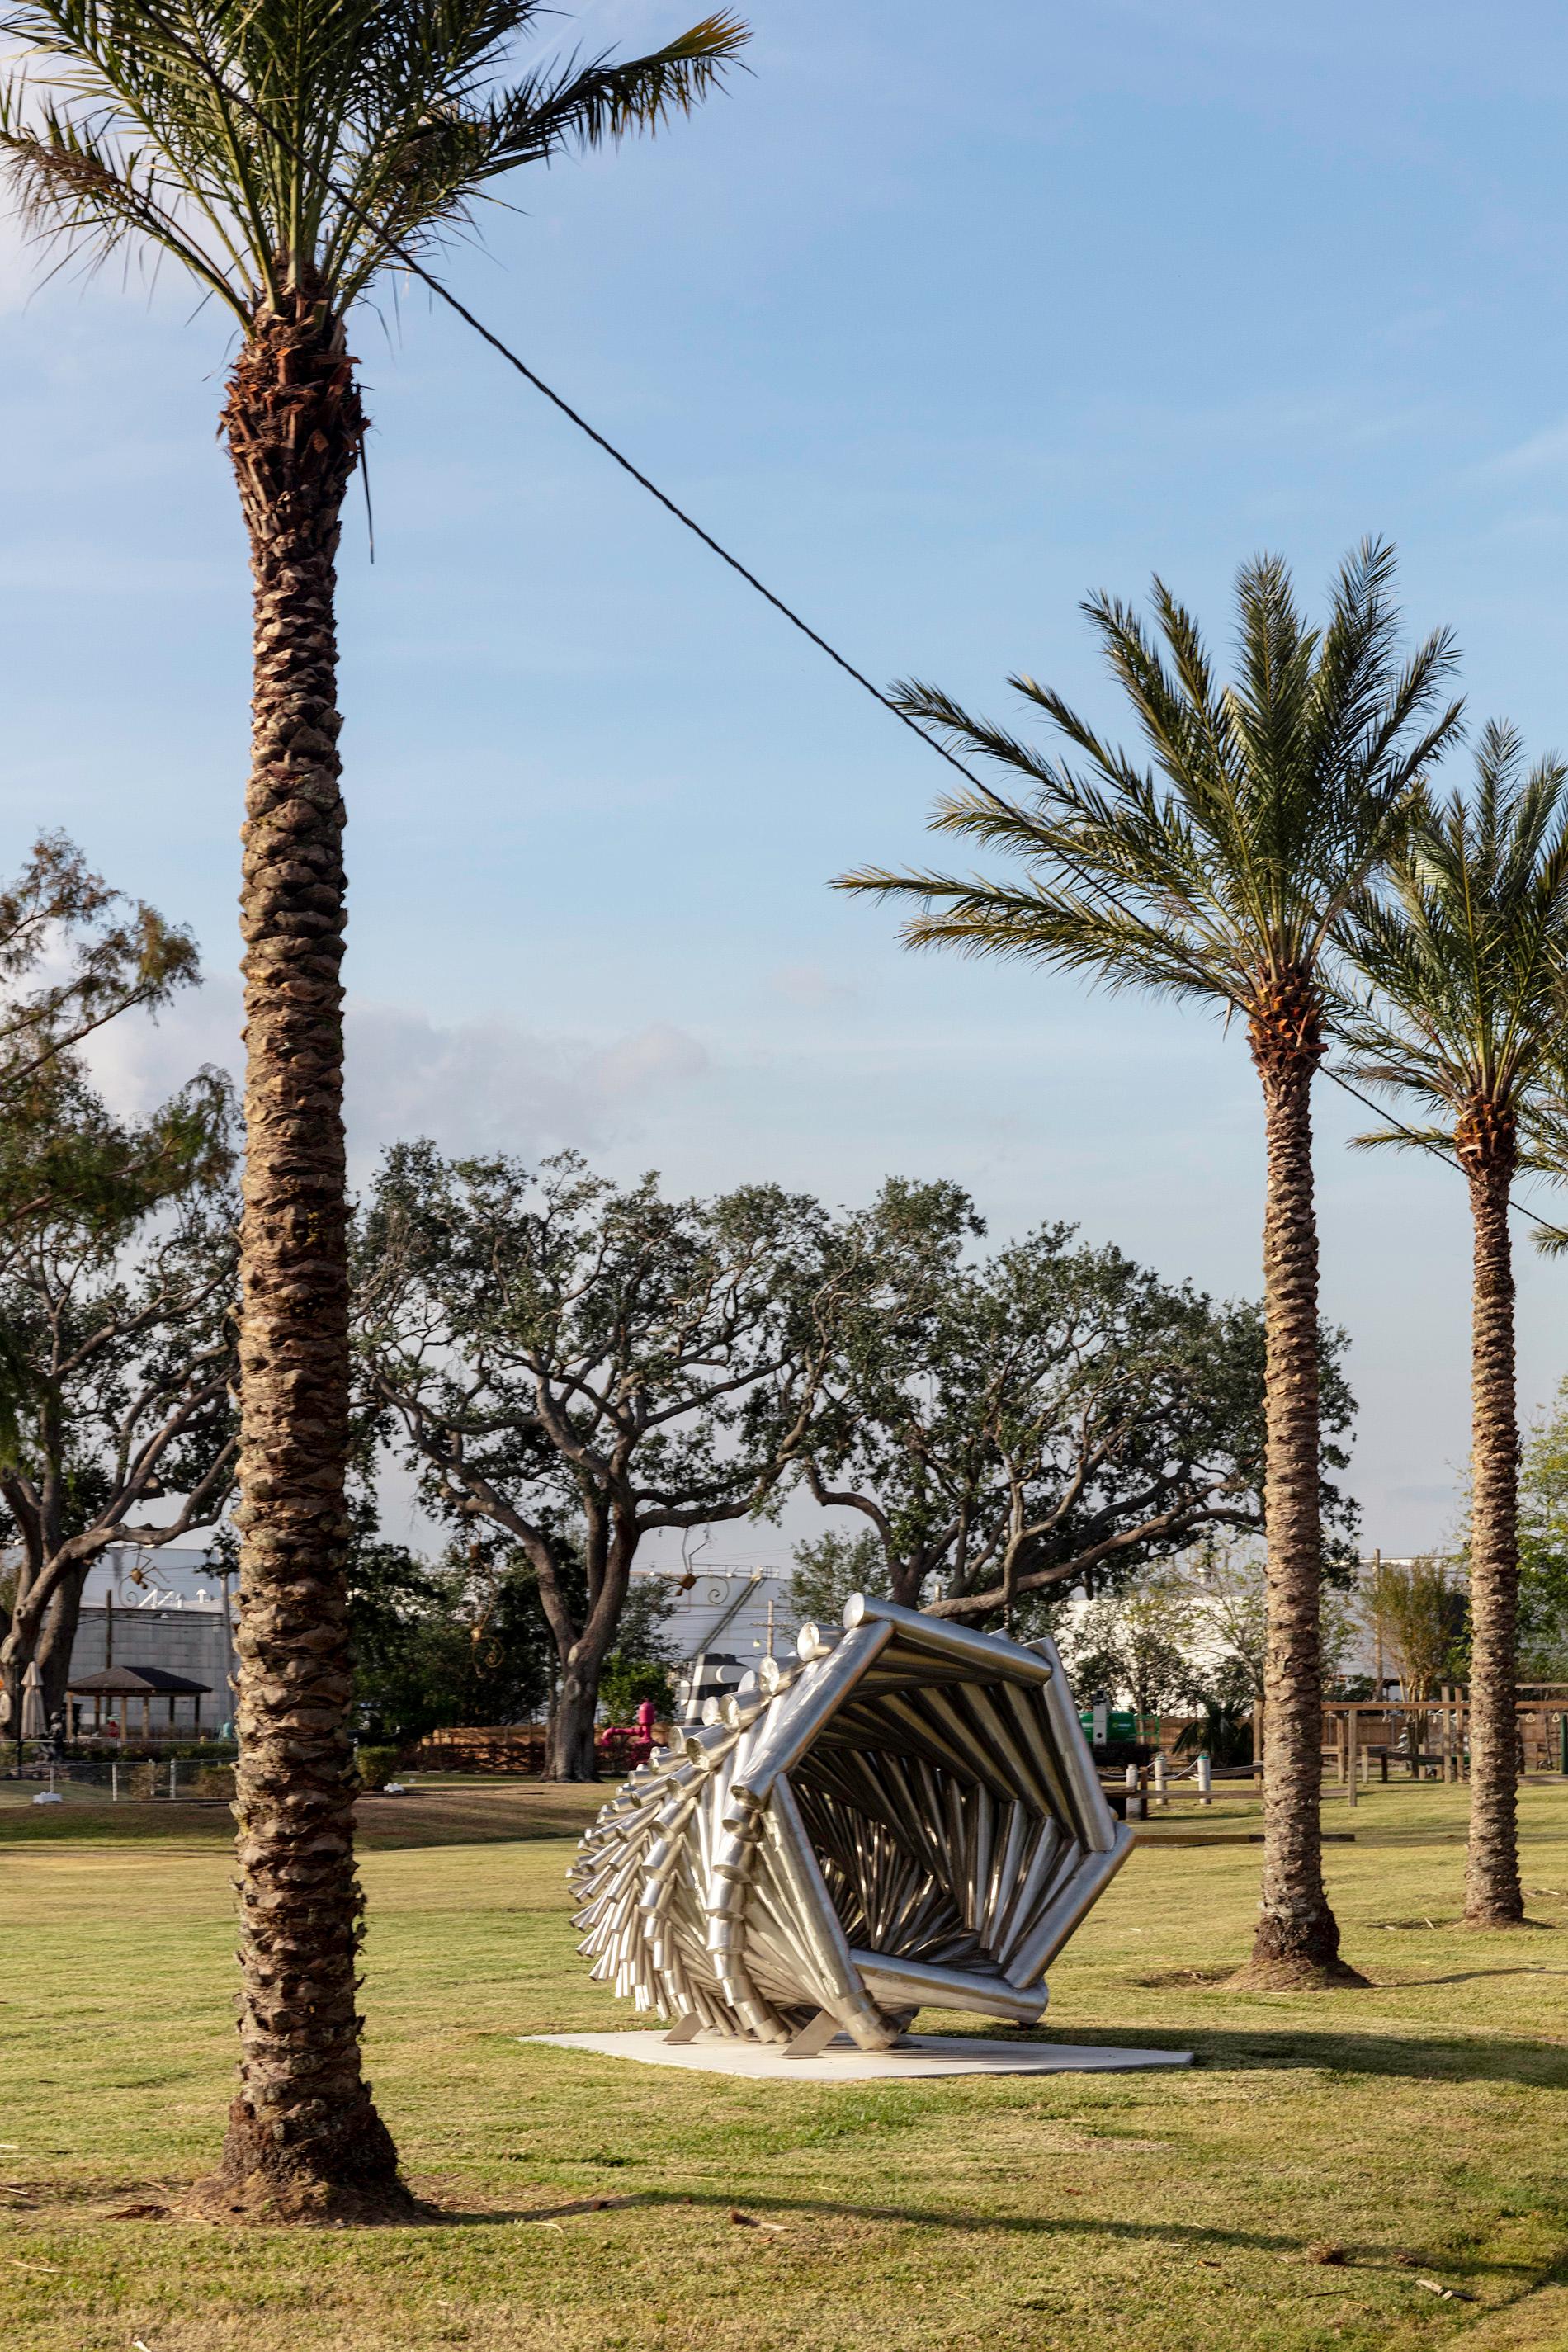 Nest - large, complex, geometric, abstract, stainless steel, outdoor sculpture - Contemporary Sculpture by Jason Kimes